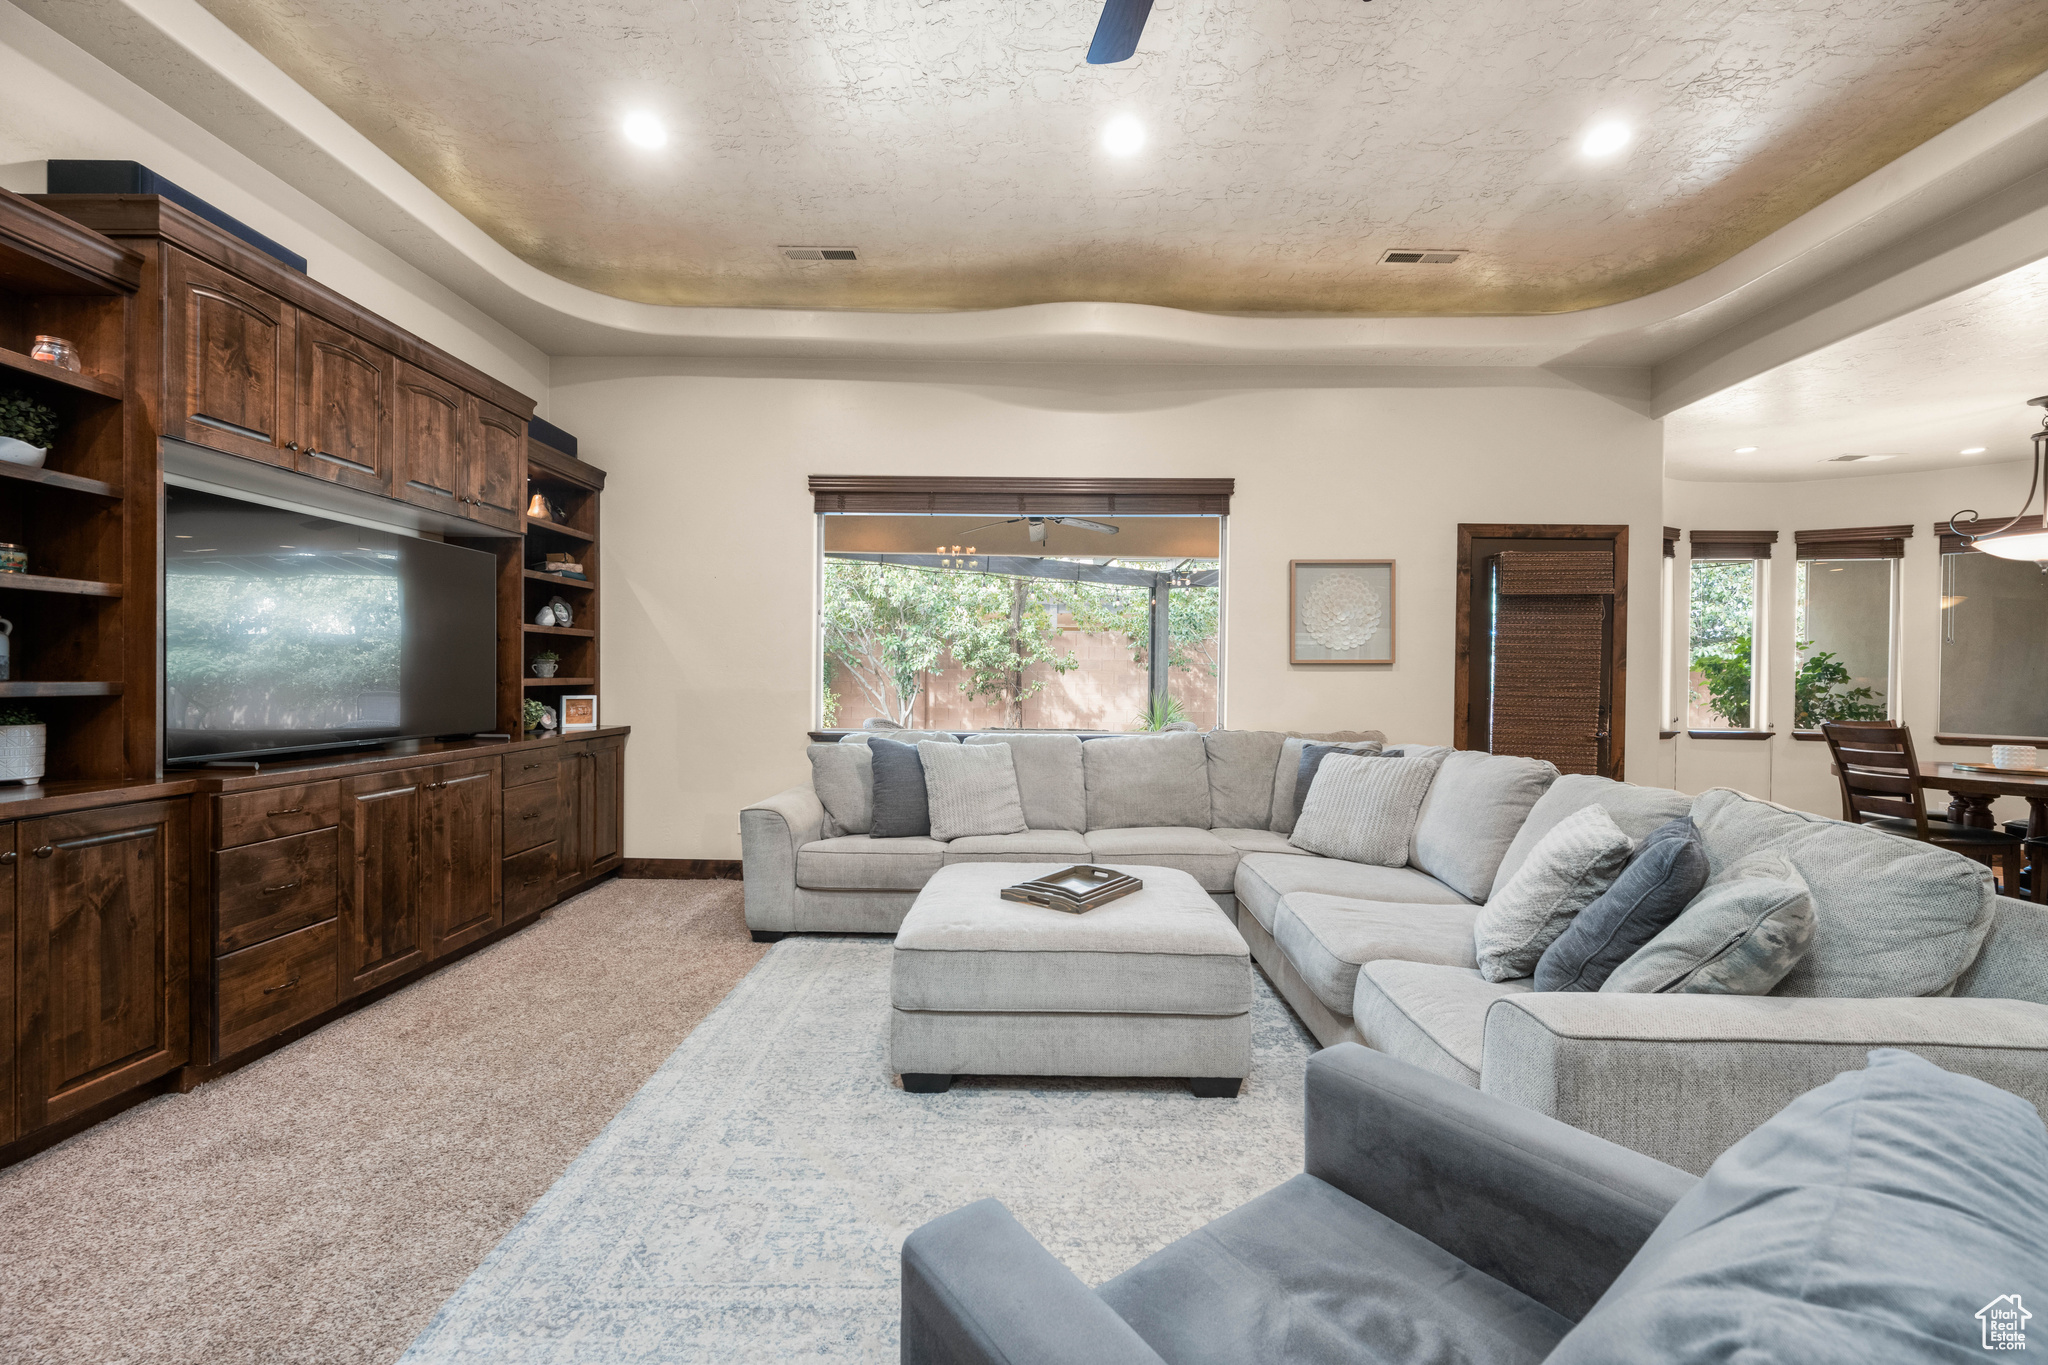 Living room featuring light colored carpet and a tray ceiling